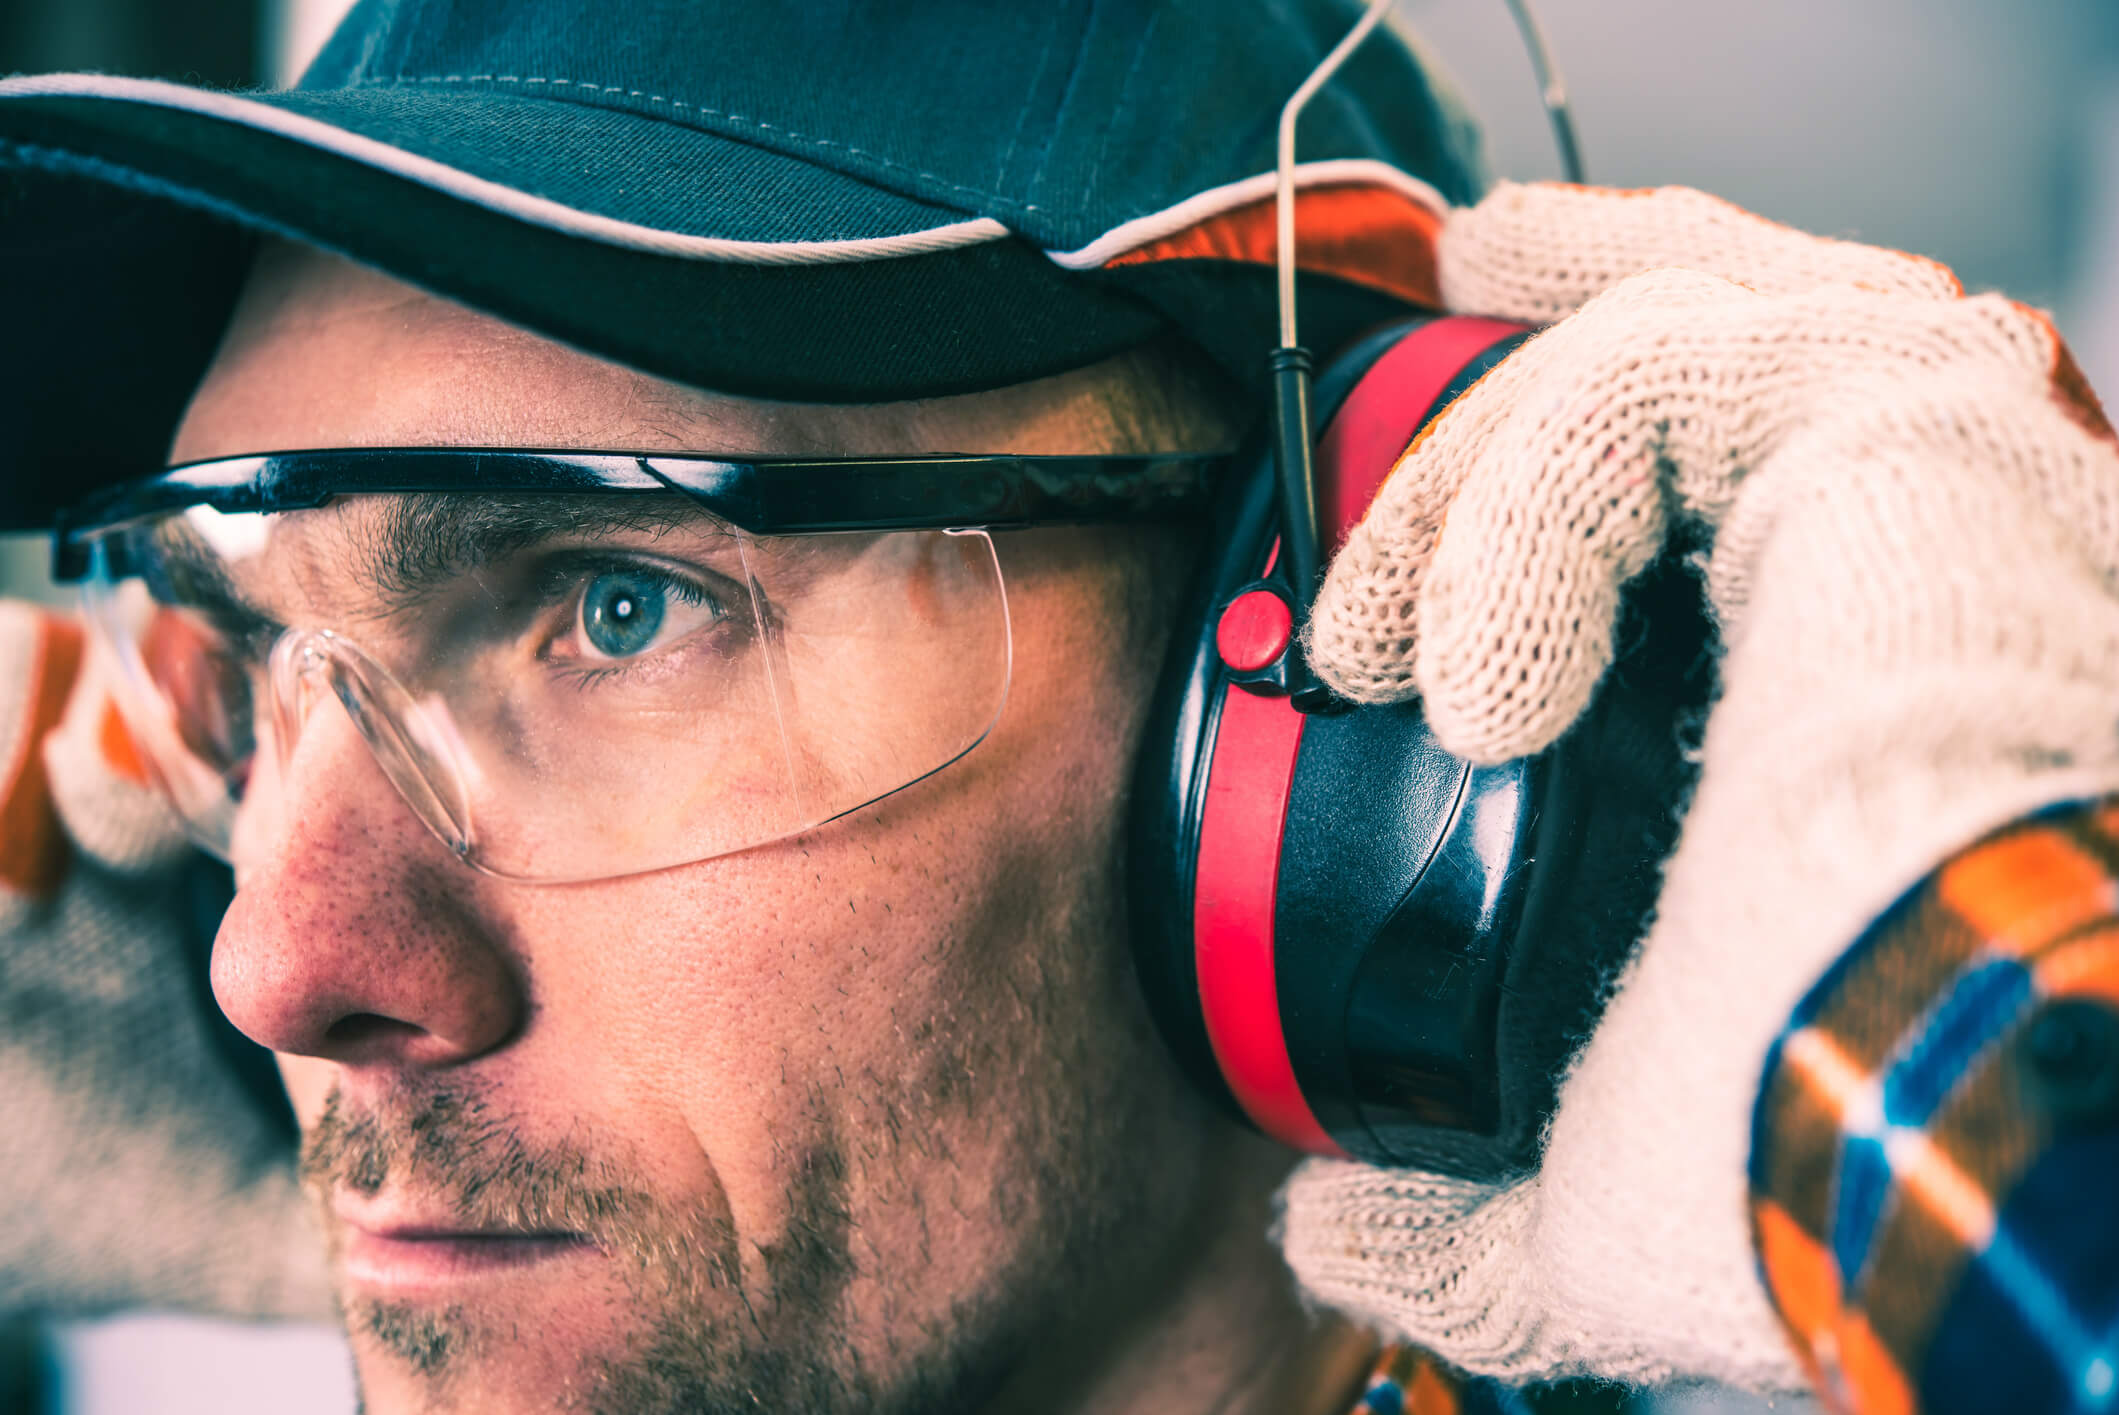 From Construction Sites to Concerts: Why You Need Ear Protection and How to Choose the Right Gear